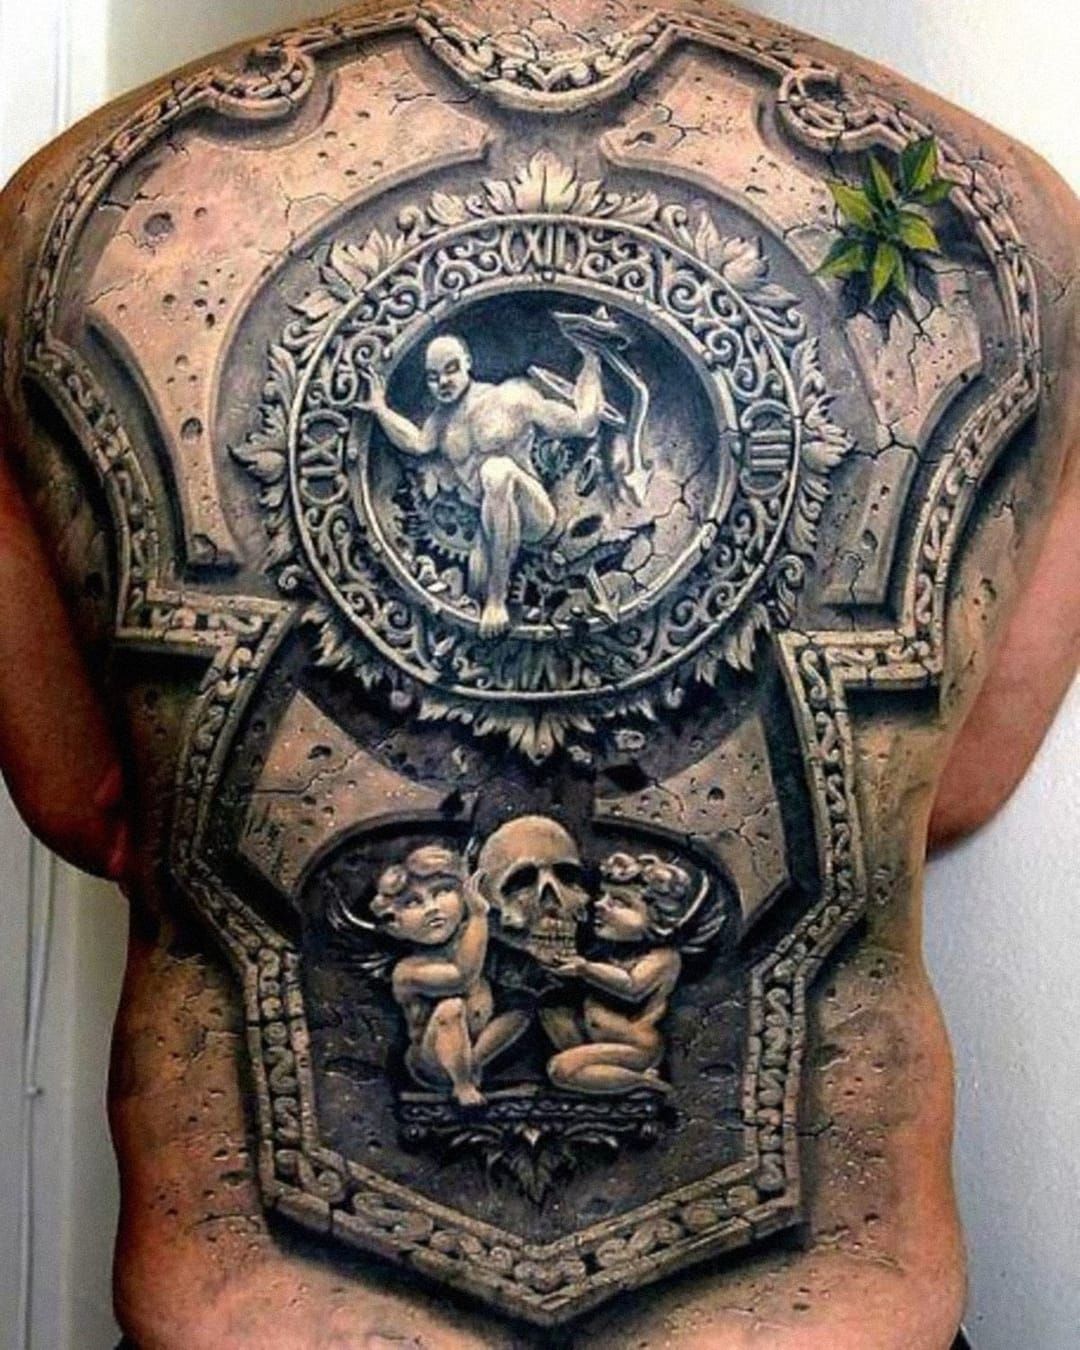 Share 70+ stone tattoo ideas best - in.cdgdbentre